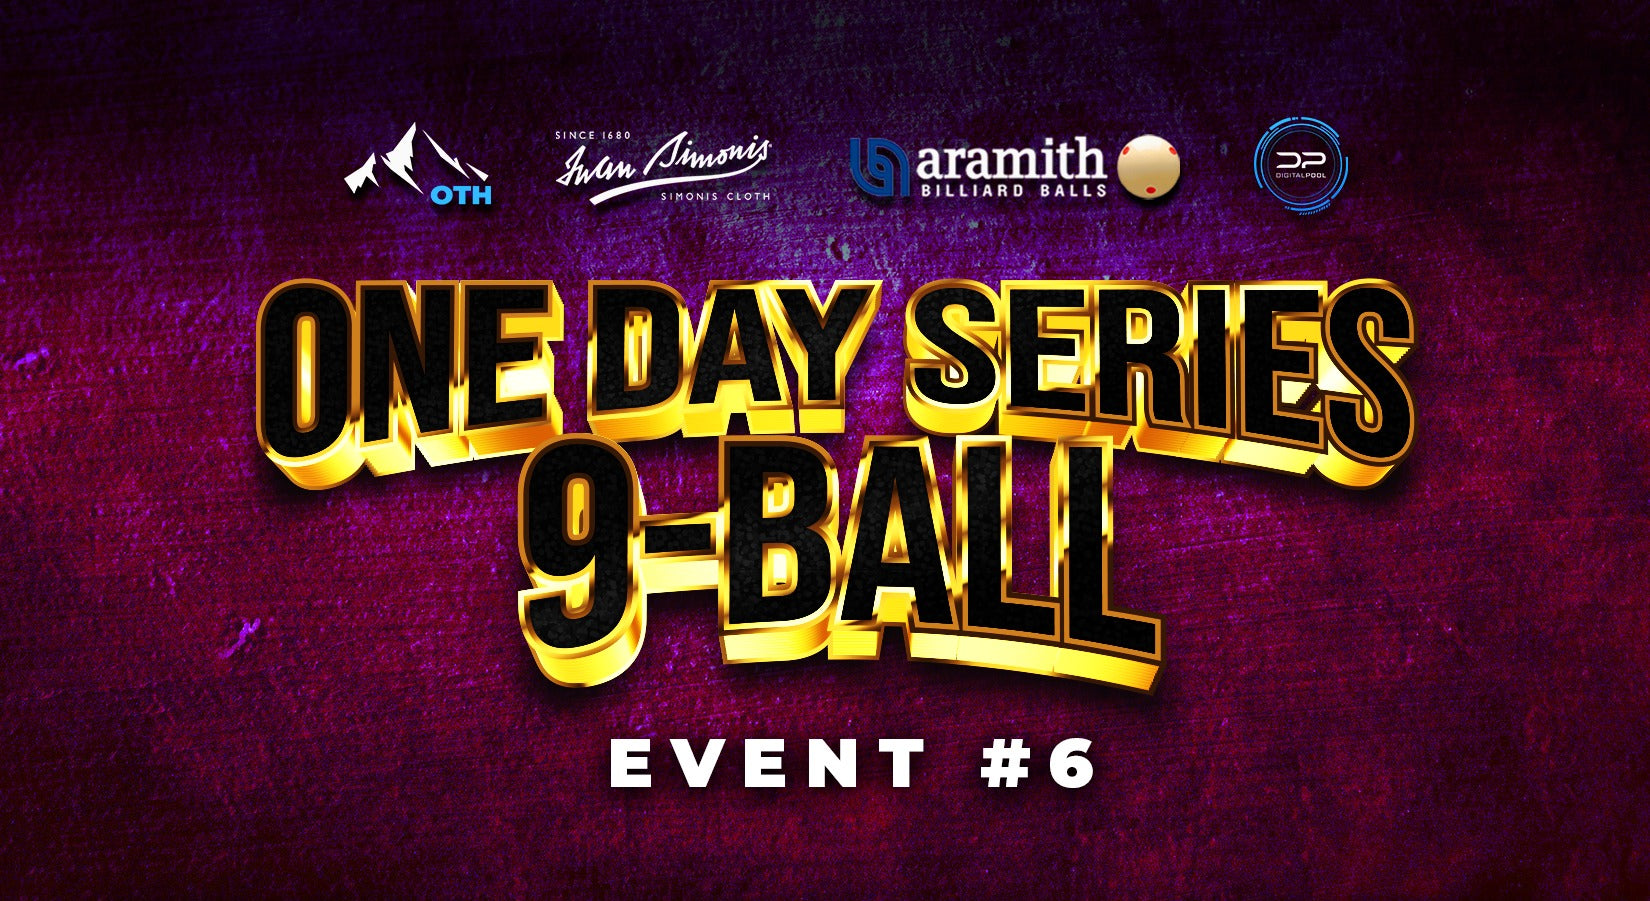 Jul 21 - One Day Open 9-Ball Series Event #6